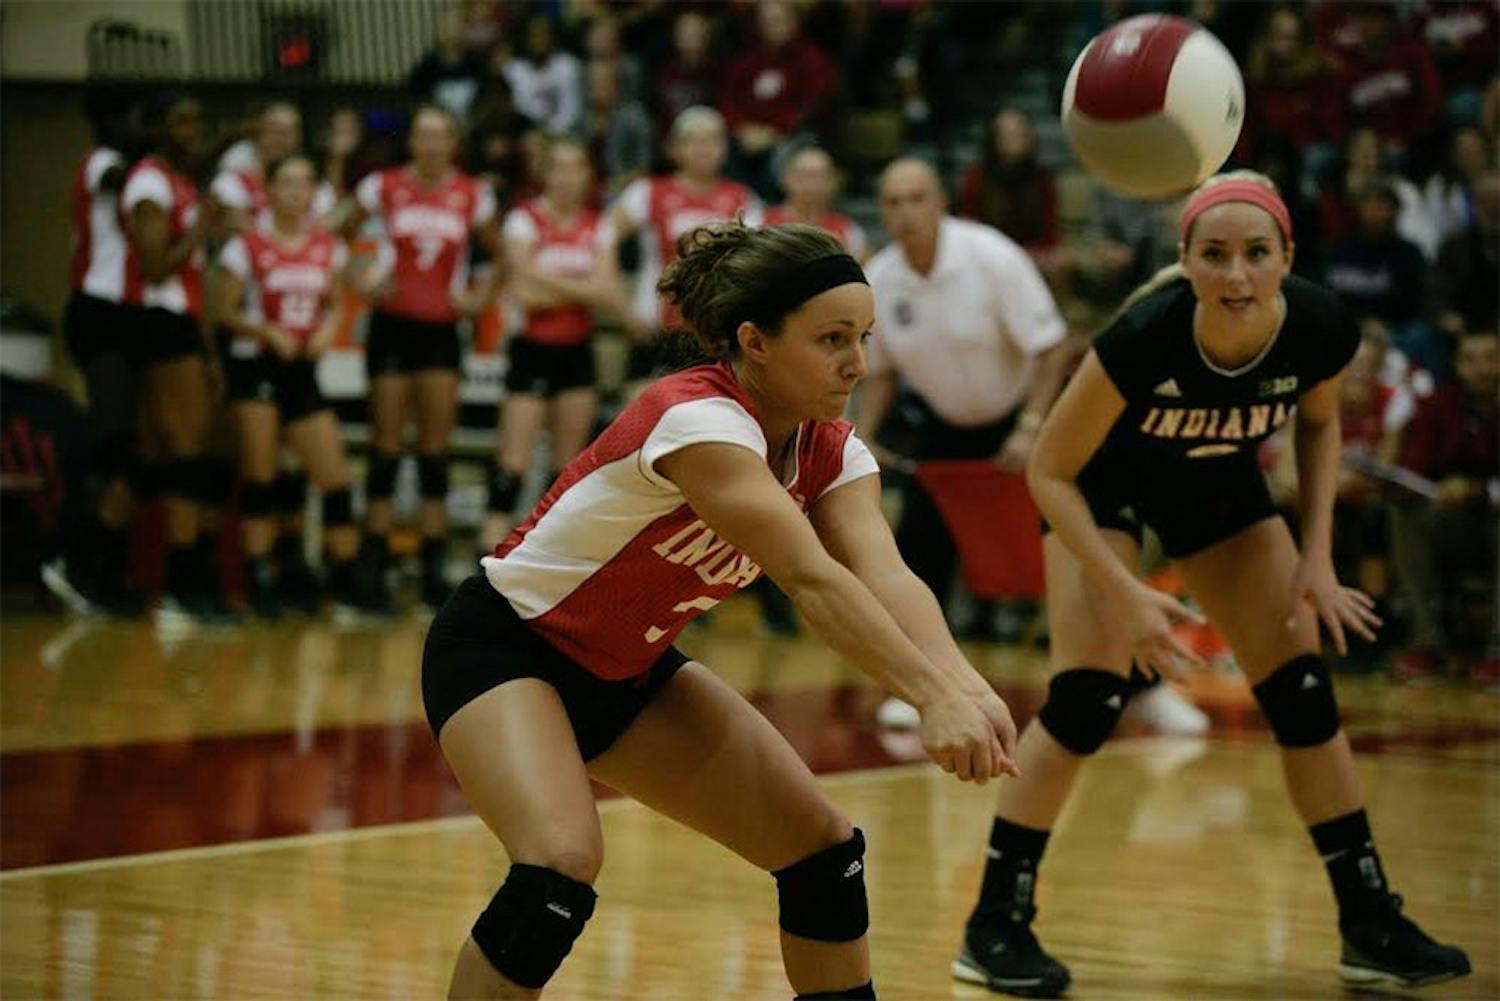 Senior defensive specialist Kyndall Merritt hits the ball during the game last Friday against Maryland. The Hoosiers played two games this weekend, defeating both Maryland and Rutgers 3-1. 